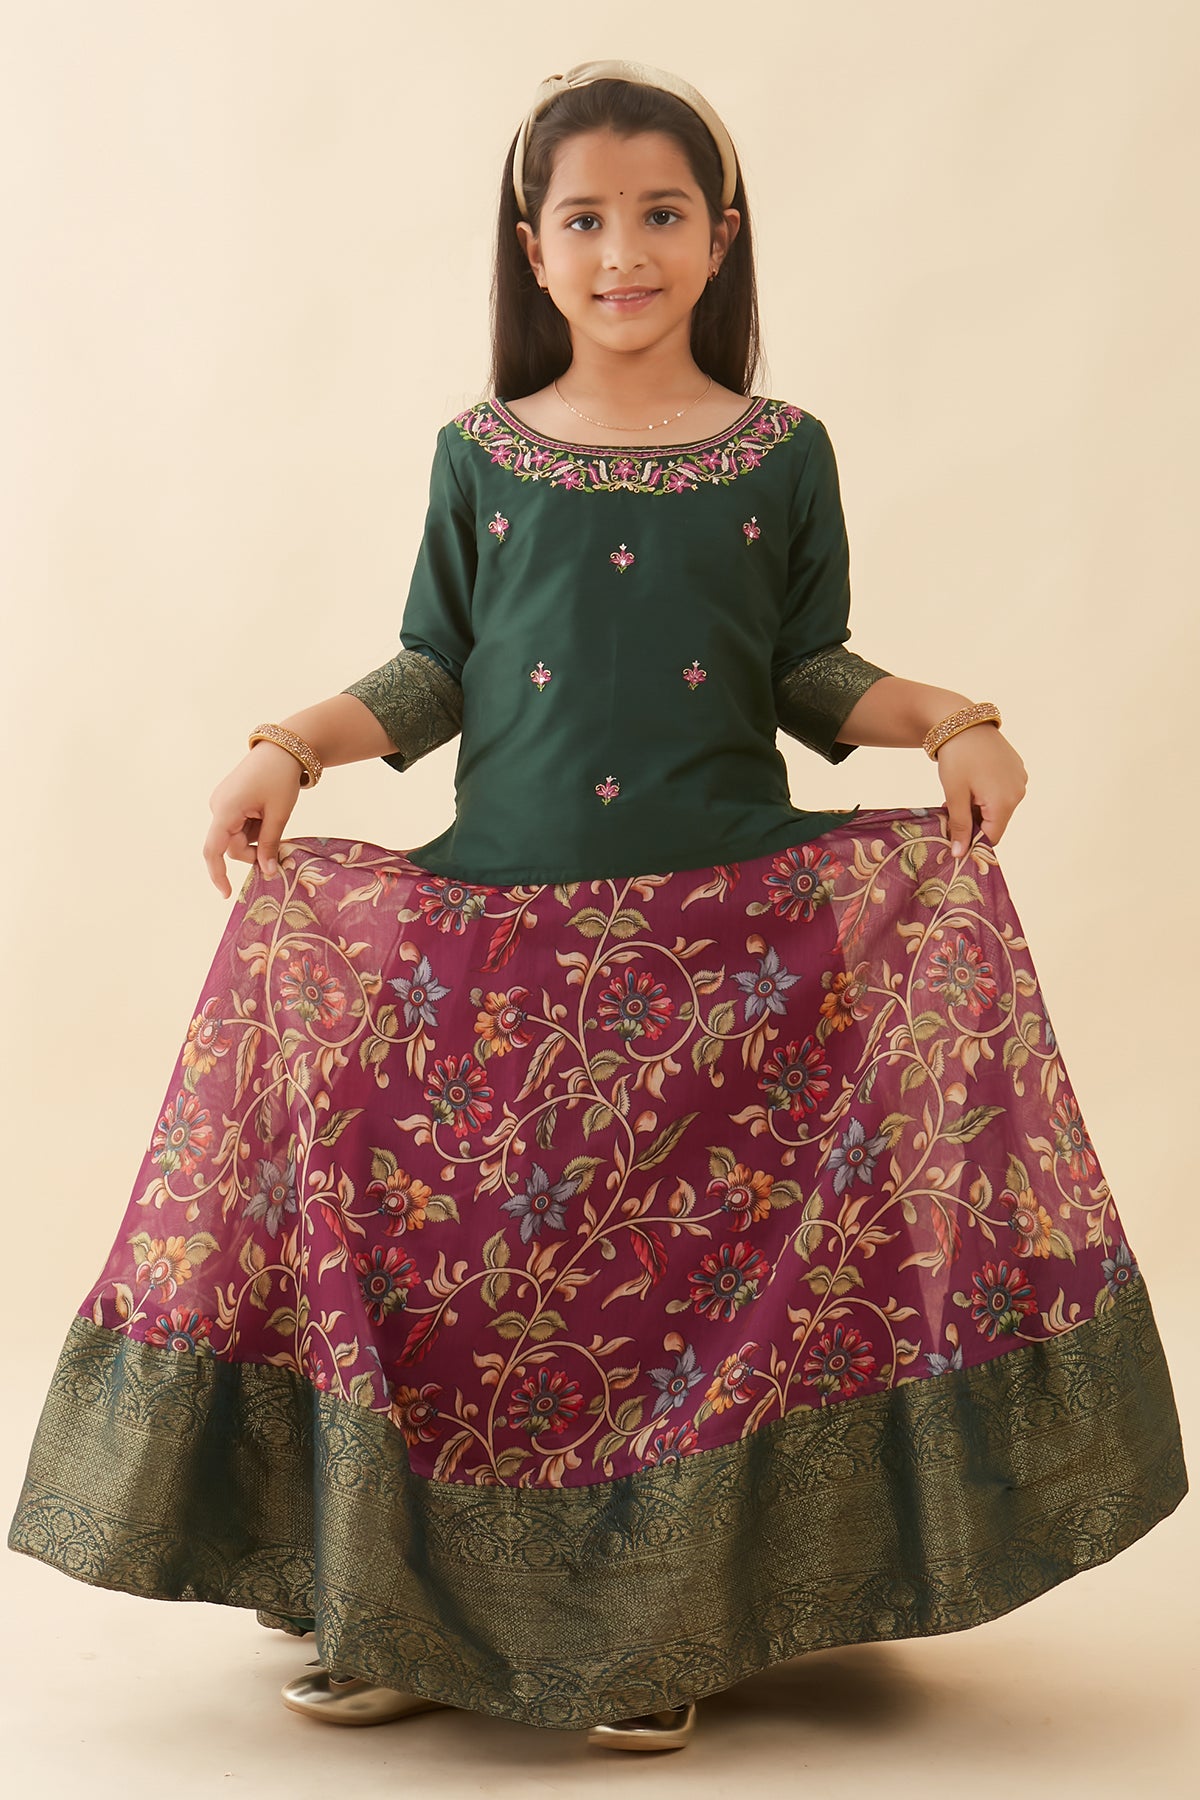 Floral Embroidered & Printed With Zari Border Kids Skirt Set - Green & Purple